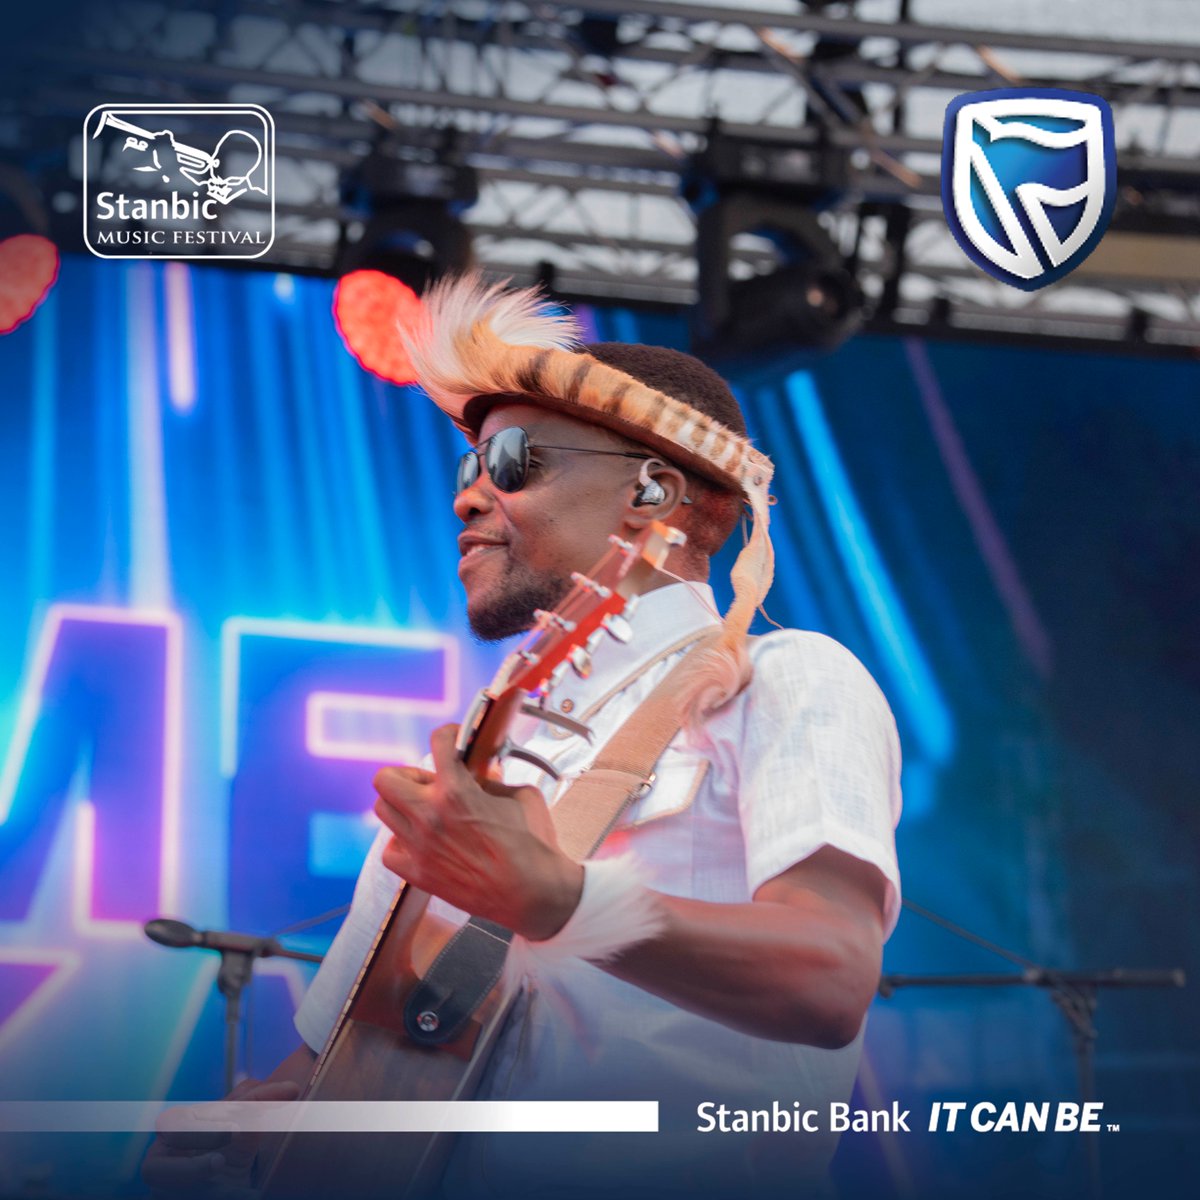 Happy Birthday to the music maestro,@JamesTSakala! Your soulful tunes and magnetic stage presence at Stanbic Music Fest are unforgettable. May your day be filled with harmonious melodies and love from your fans. Here's to another year of musical brilliance and joy! #SMF2023